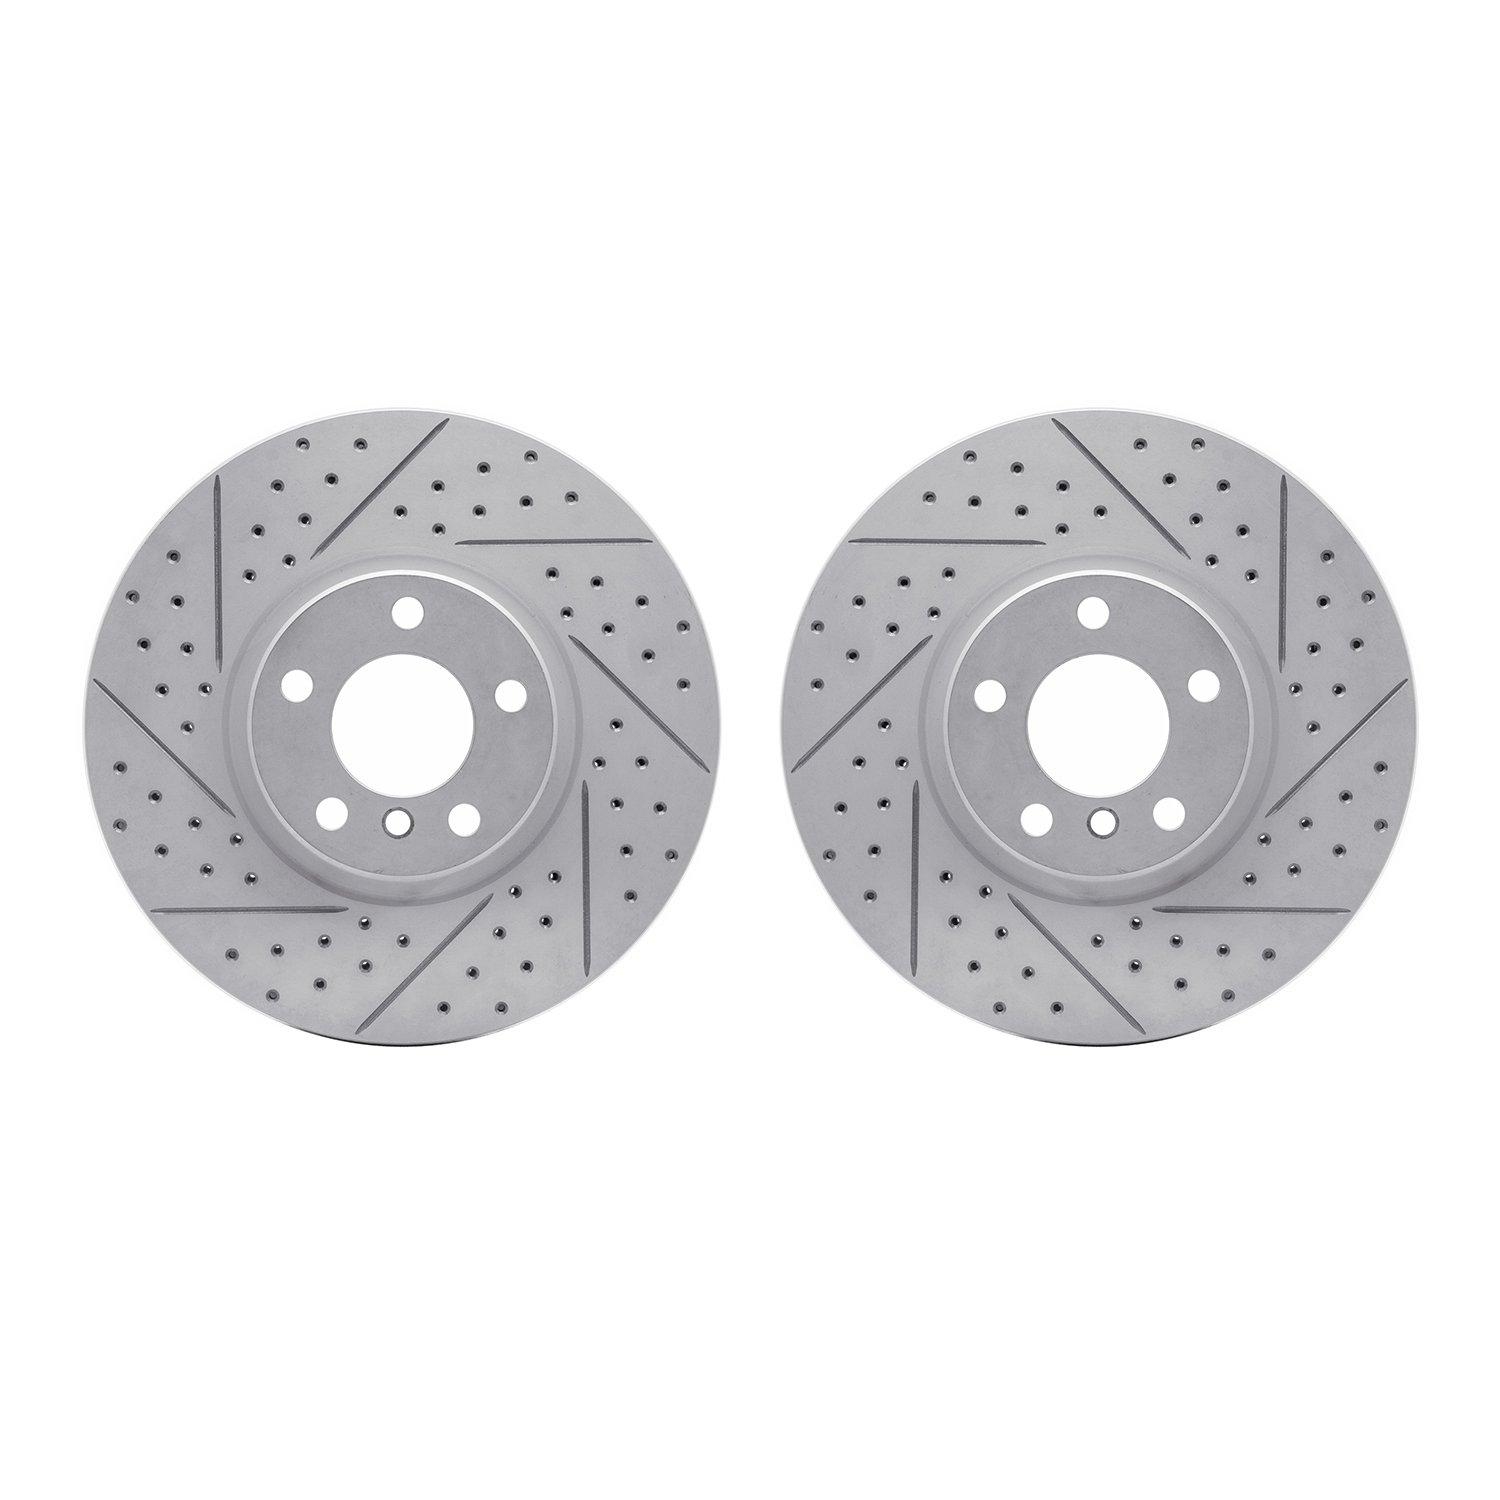 2002-31046 Geoperformance Drilled/Slotted Brake Rotors, 2007-2018 BMW, Position: Front